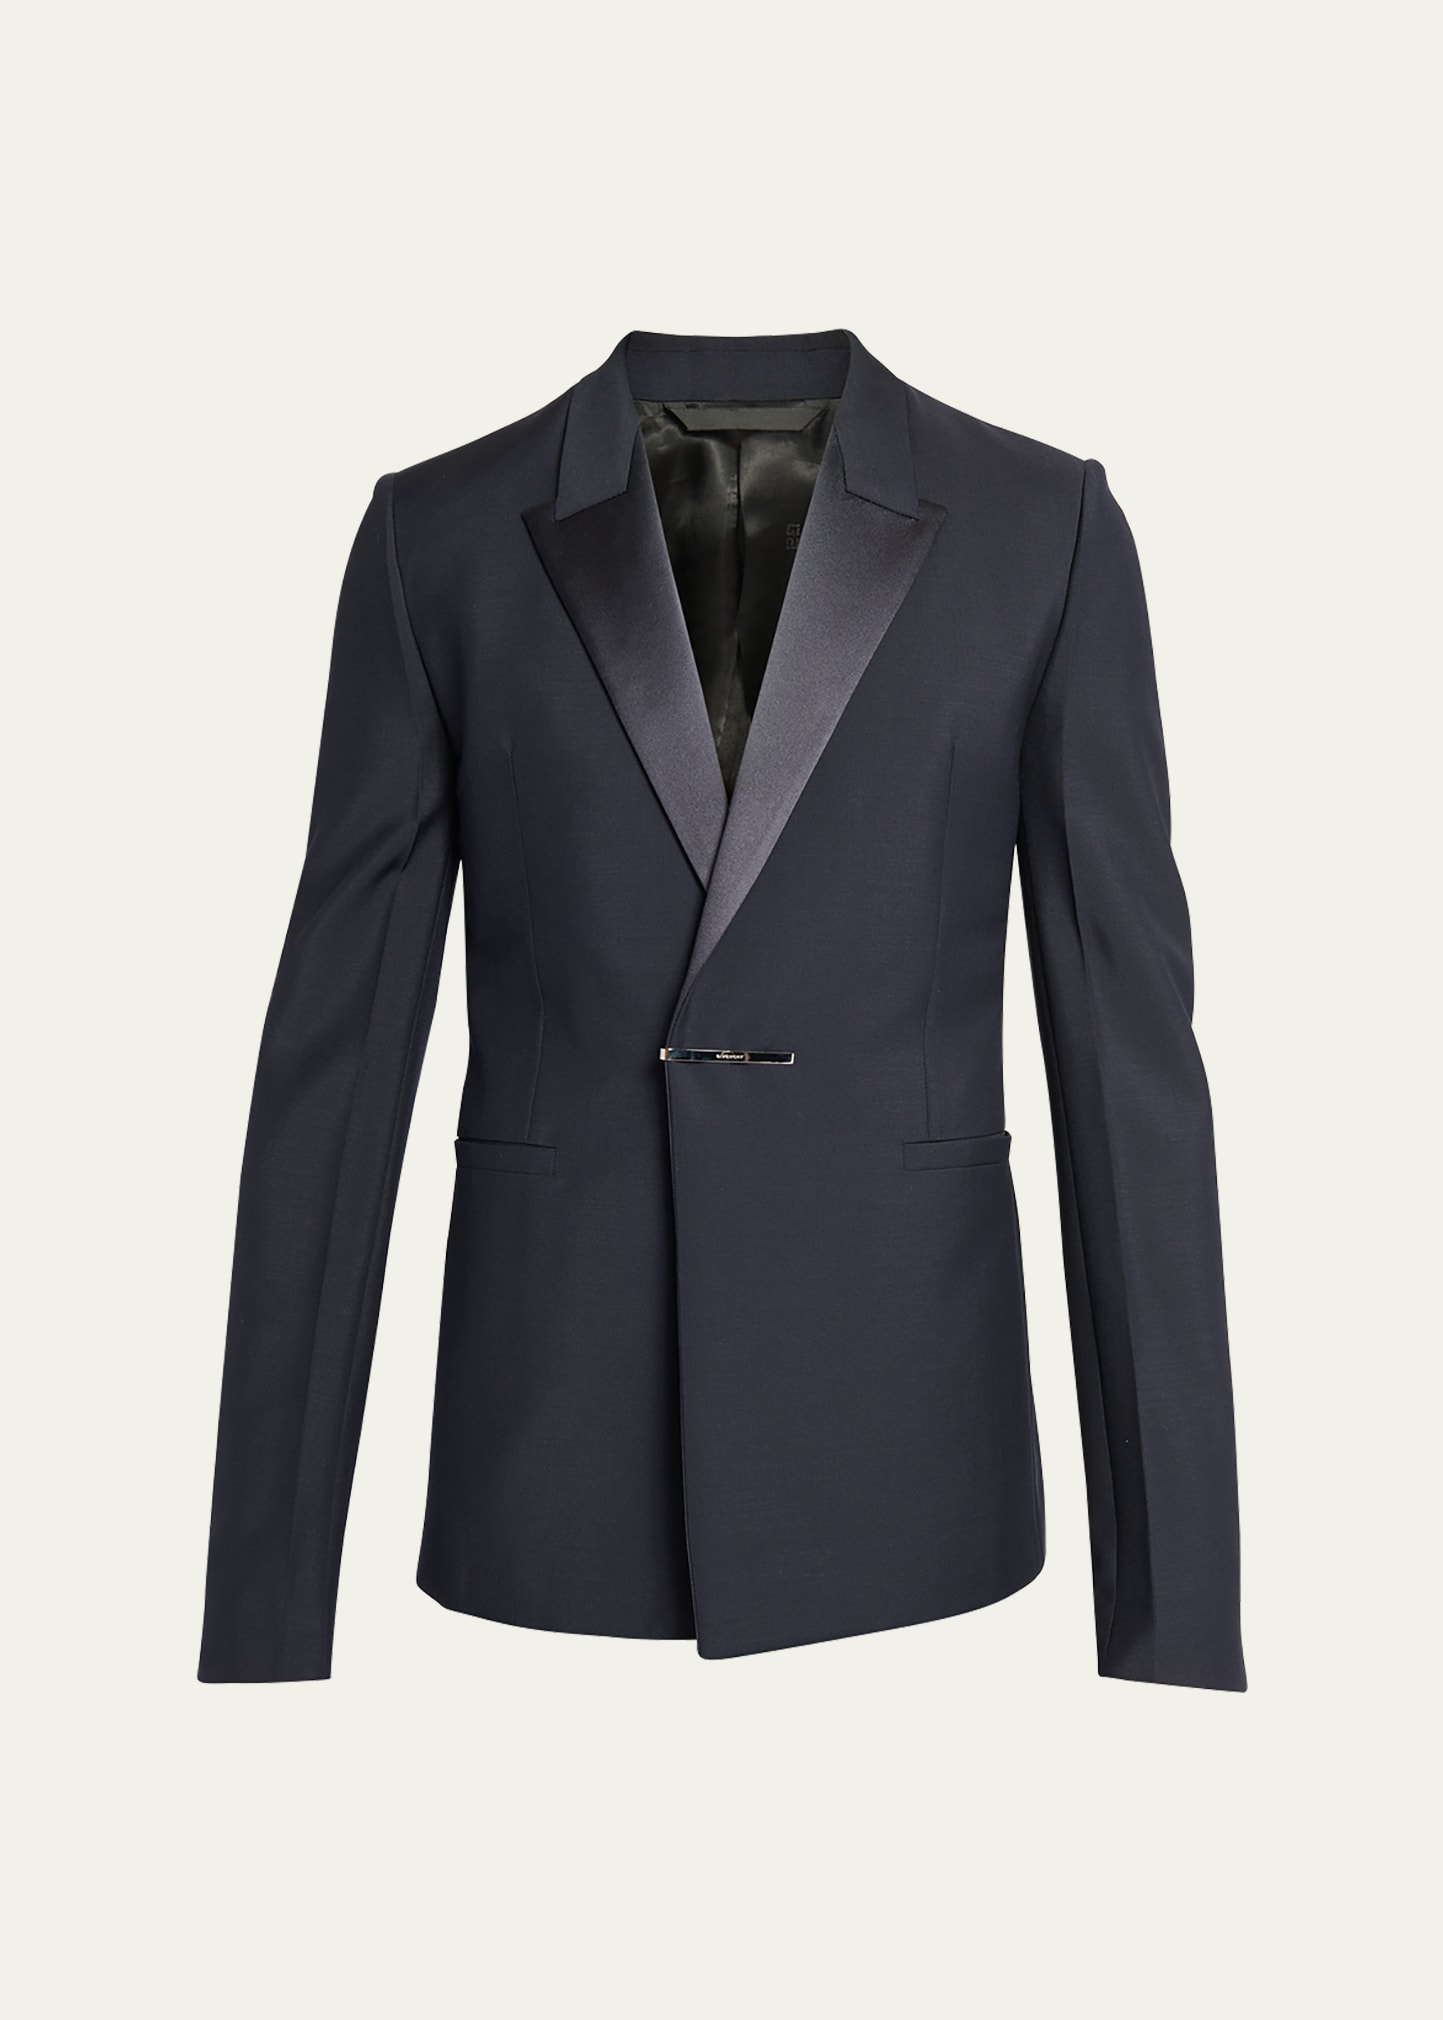 Givenchy Men's Evening Jacket With Metal Clip Closure In Night Blue